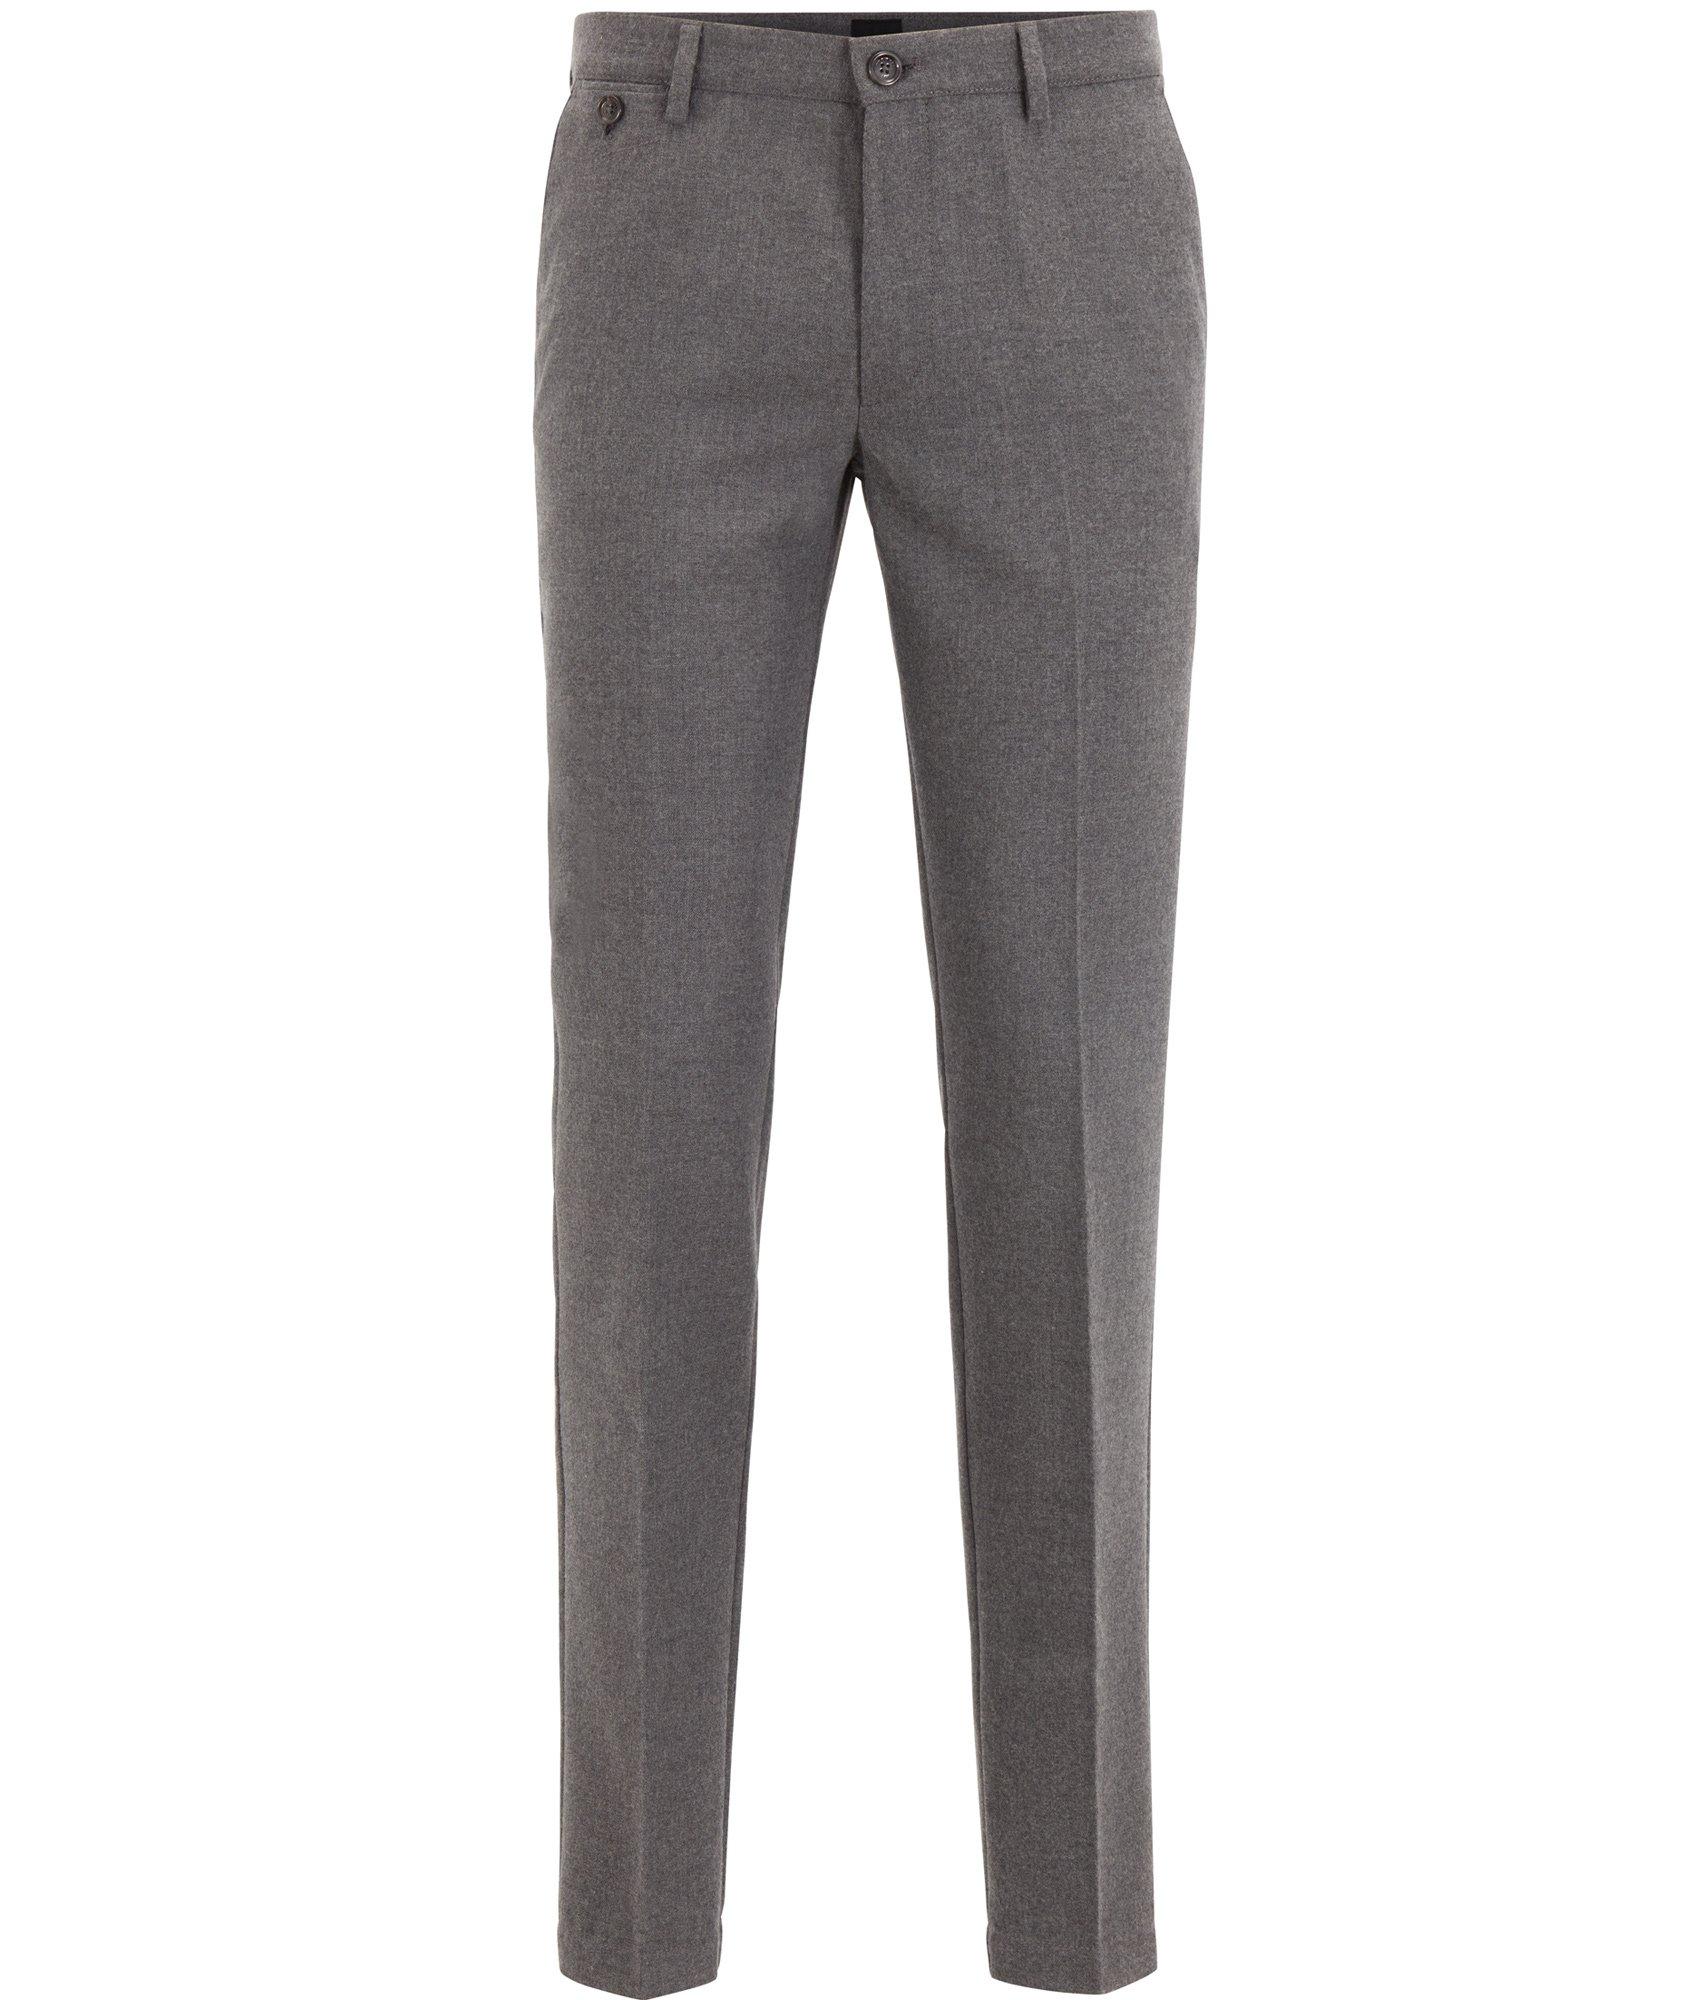 Kaito Brushed Wool-Blend Trousers image 0